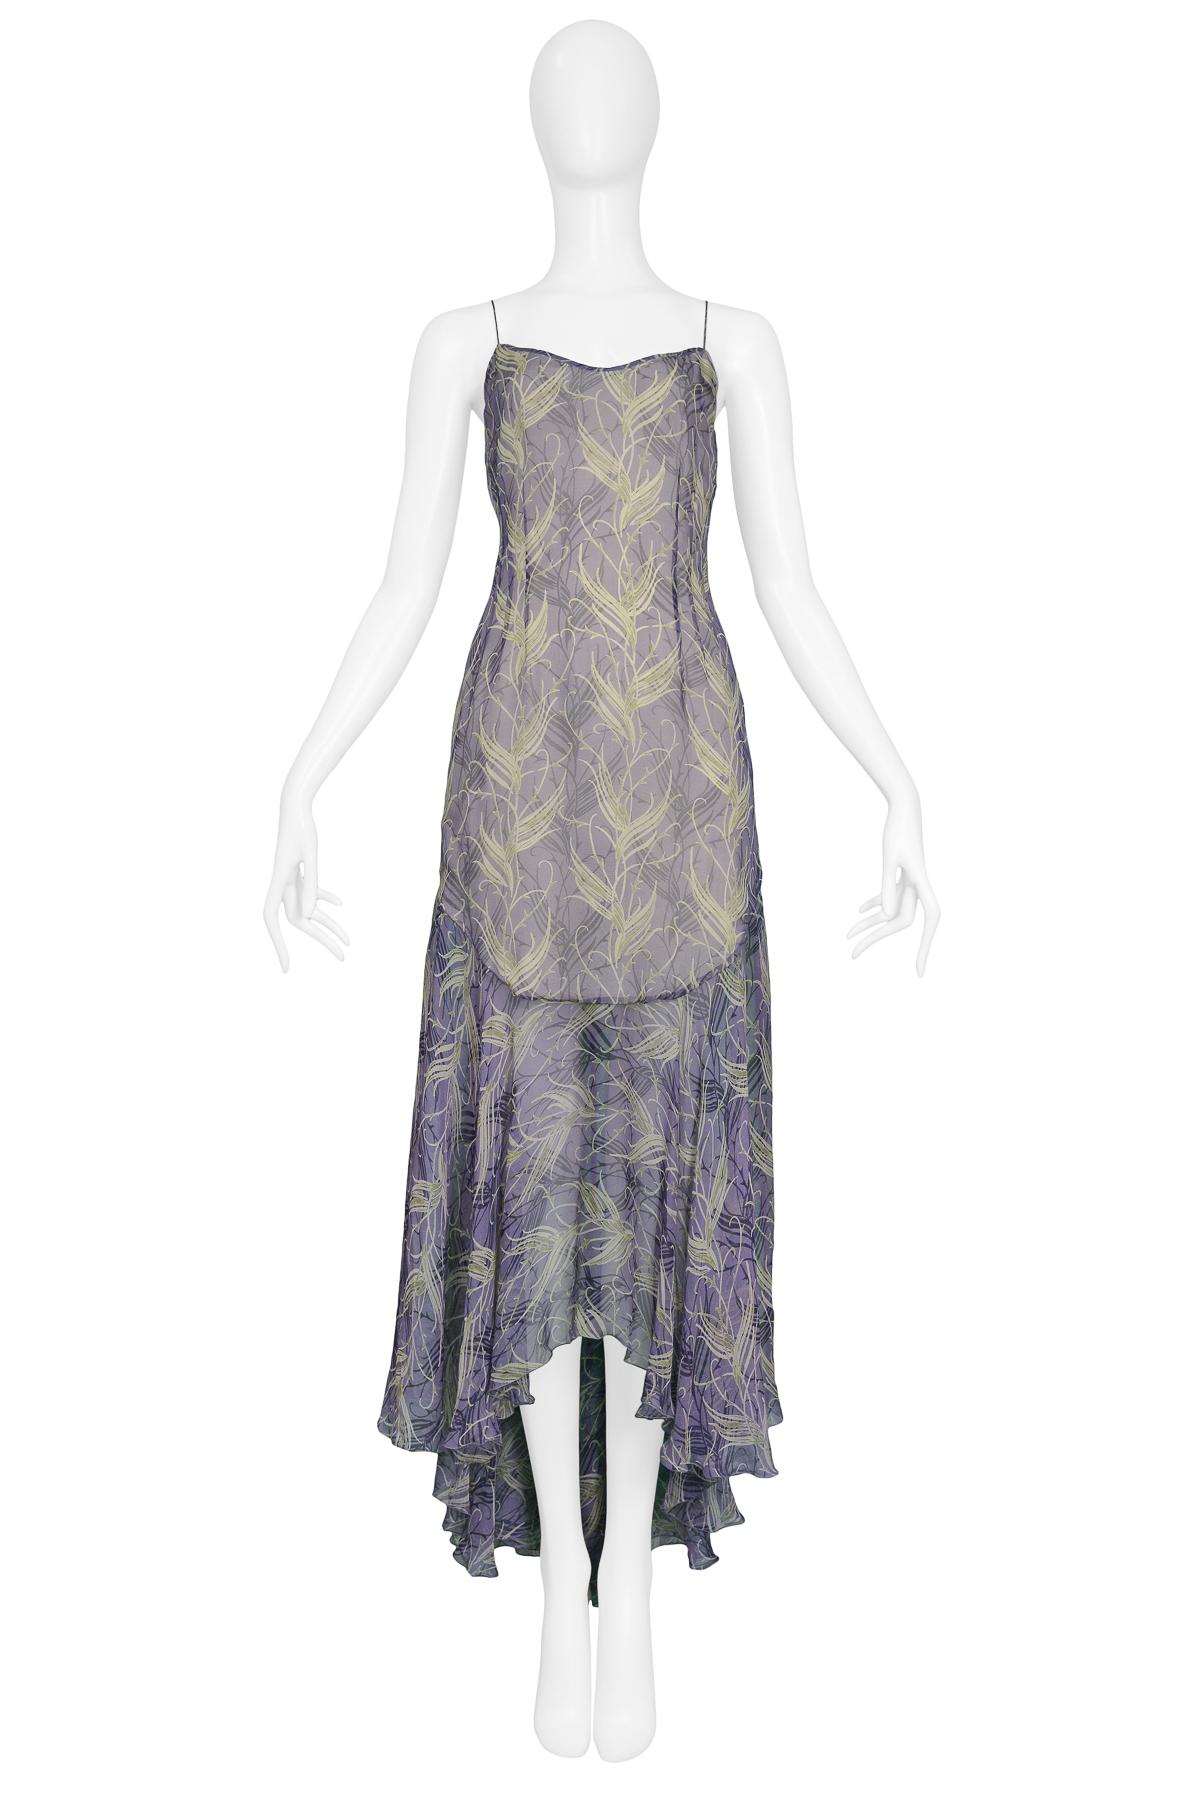 Vintage Stella McCartney for Chloe blue silk slip dress featuring a pastel green abstract feather print, a darted bodice, drop waist and spaghetti straps. Runway piece from the 1999 Spring / Summer Collection.

Excellent Vintage Condition.

No Size